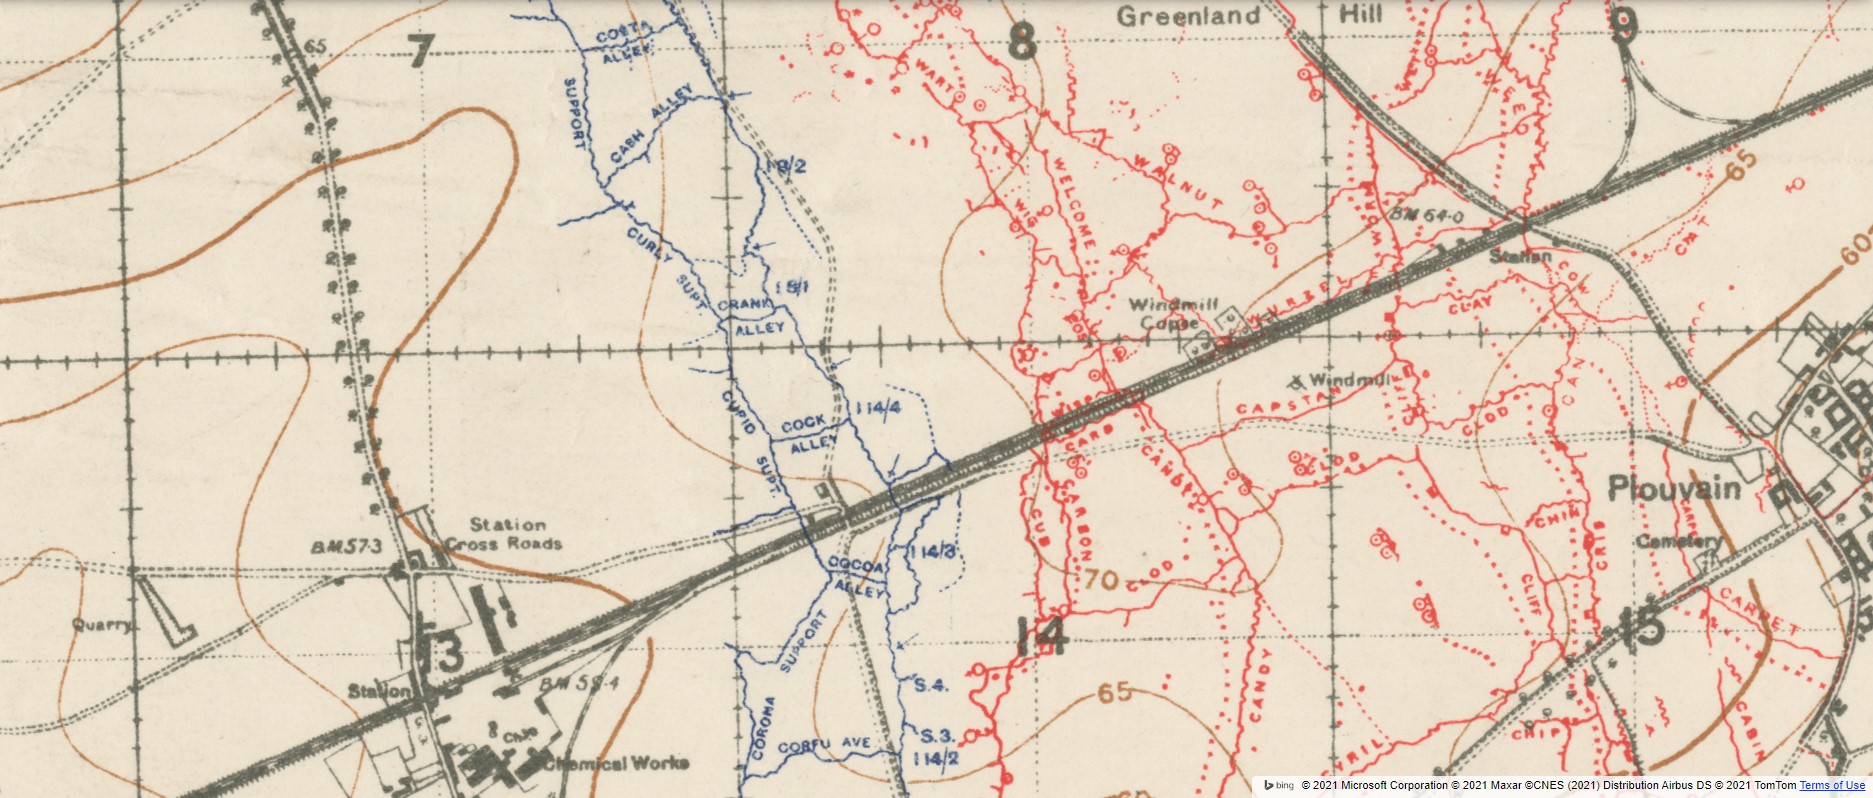 NLS WWI Trench Map Arras 1917 11 20 a